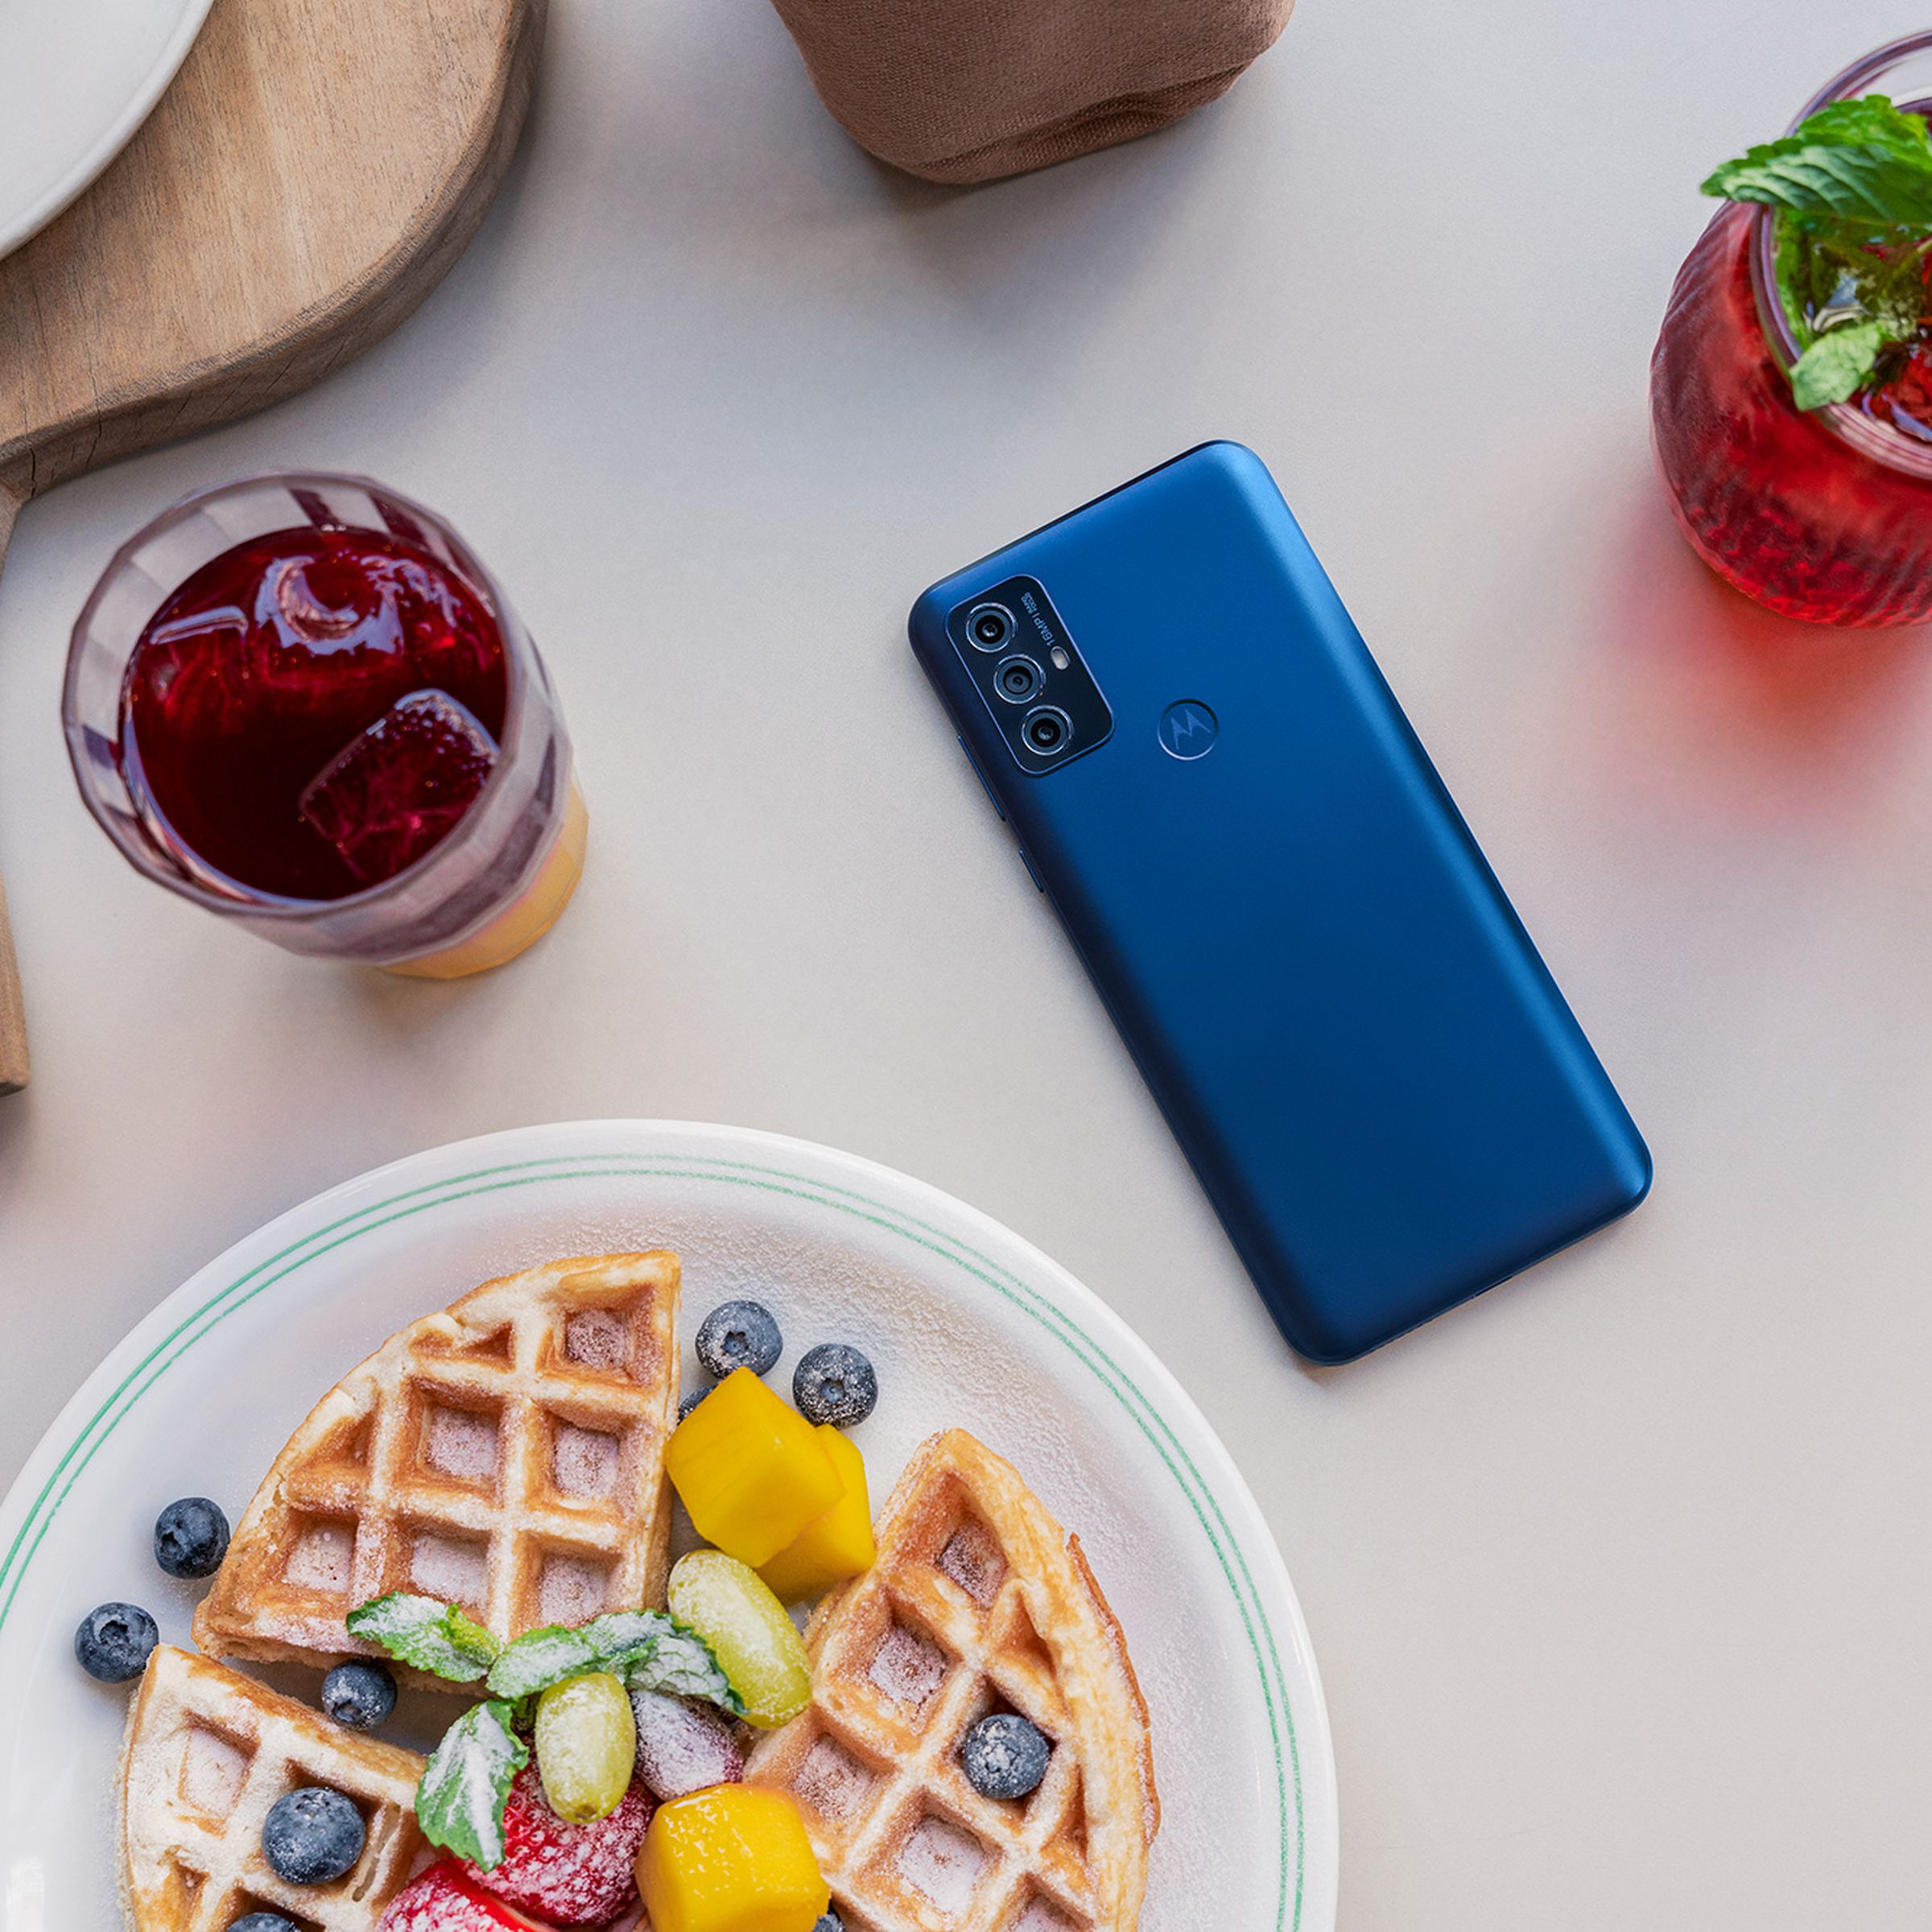 Motorola G Play, in blue, flat on a table with the rear facing up surrounded by breakfast plates and items.